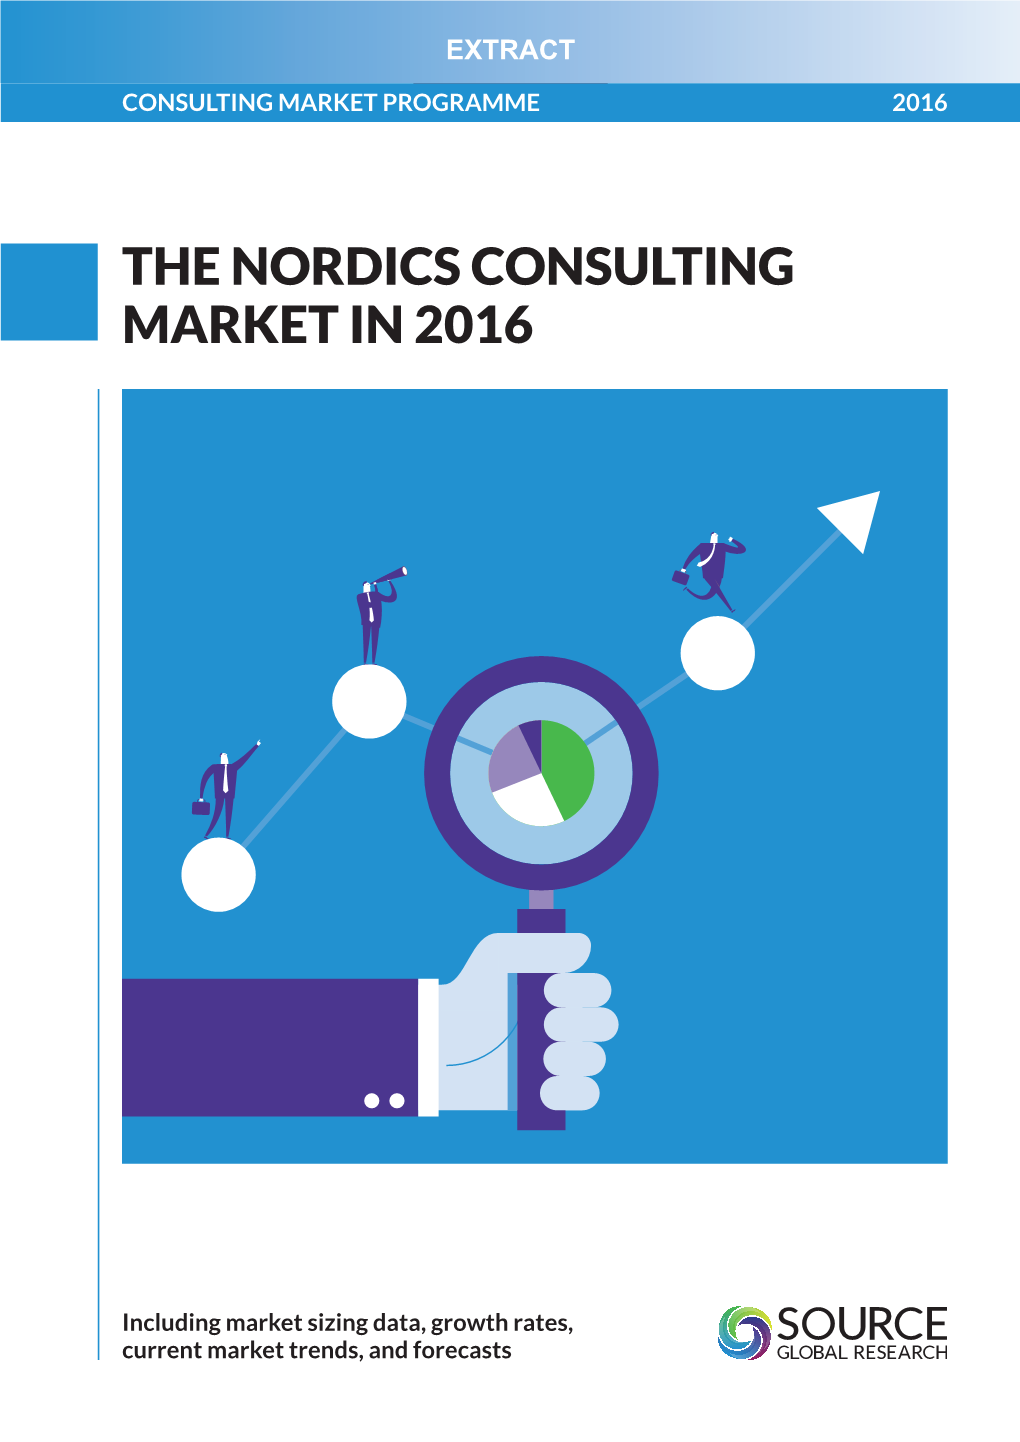 The Nordic Consulting Market Grew by a Respectable, If Underwhelming, 3.2% in 2015